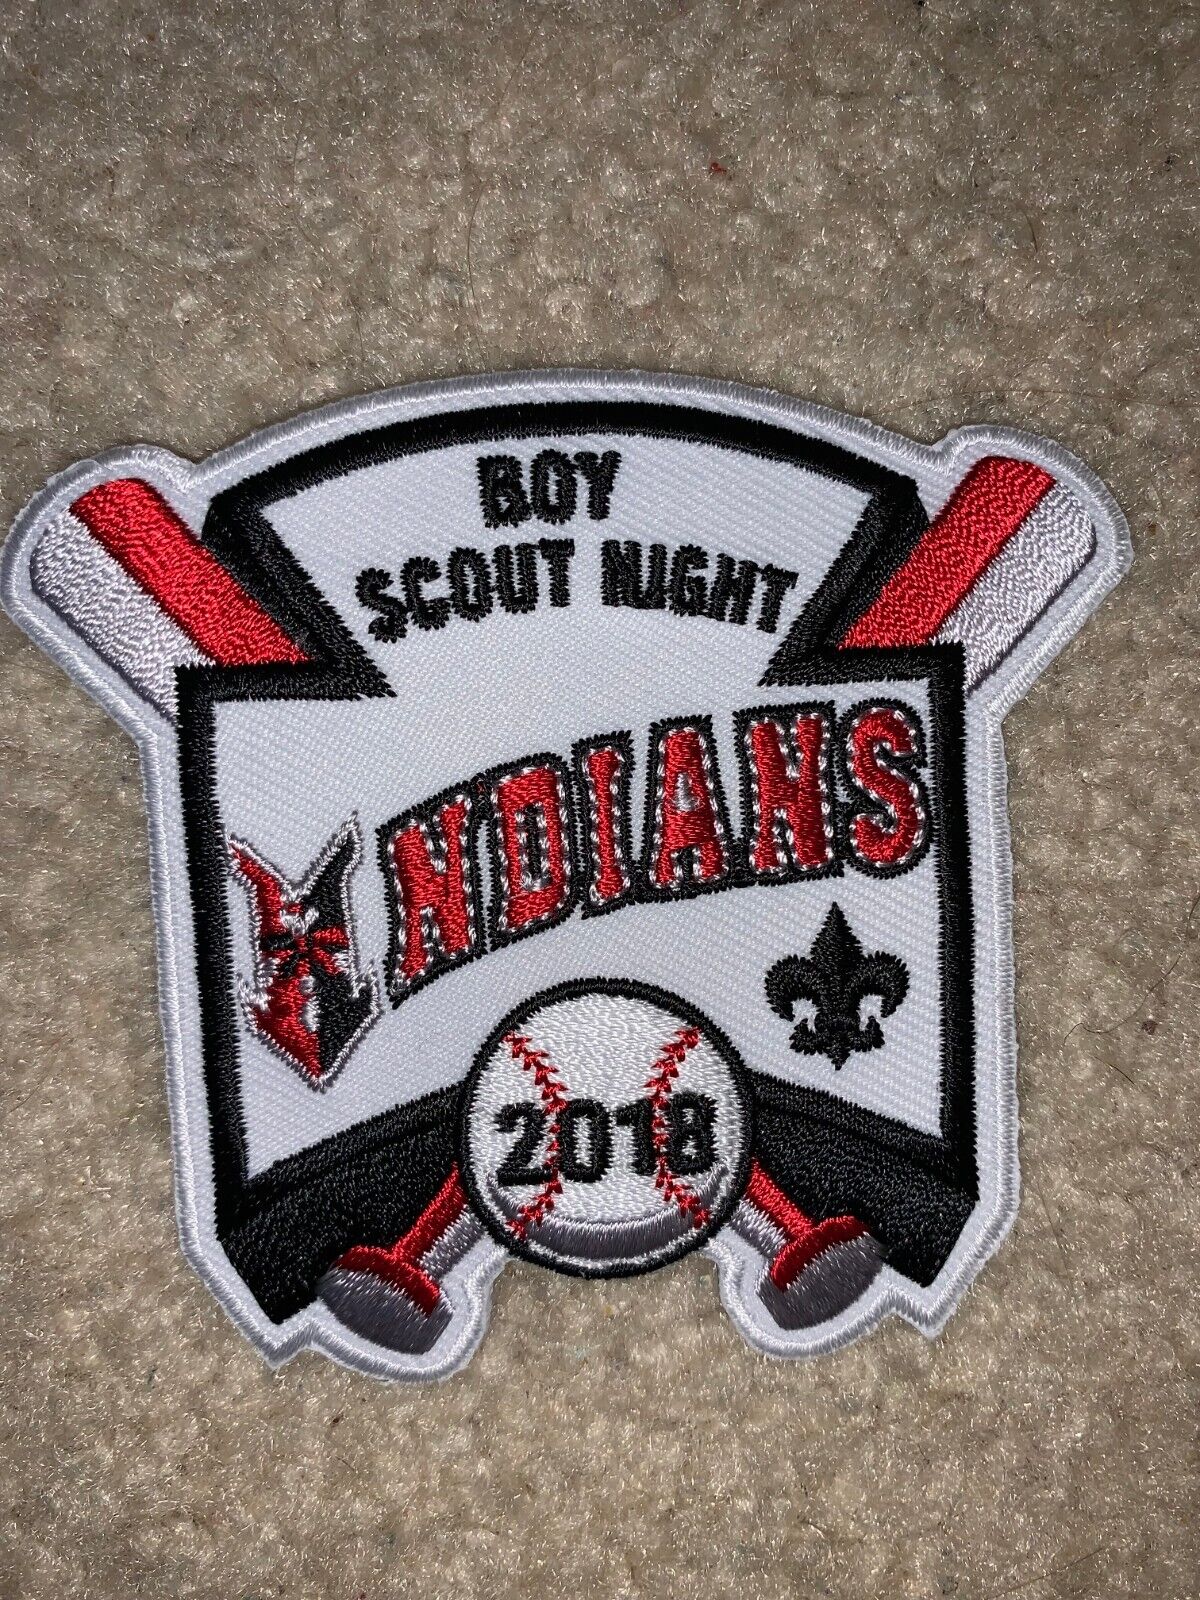 Boy Scout Indianapolis Indians 18 Indiana Crossroads America Council Sport Patch